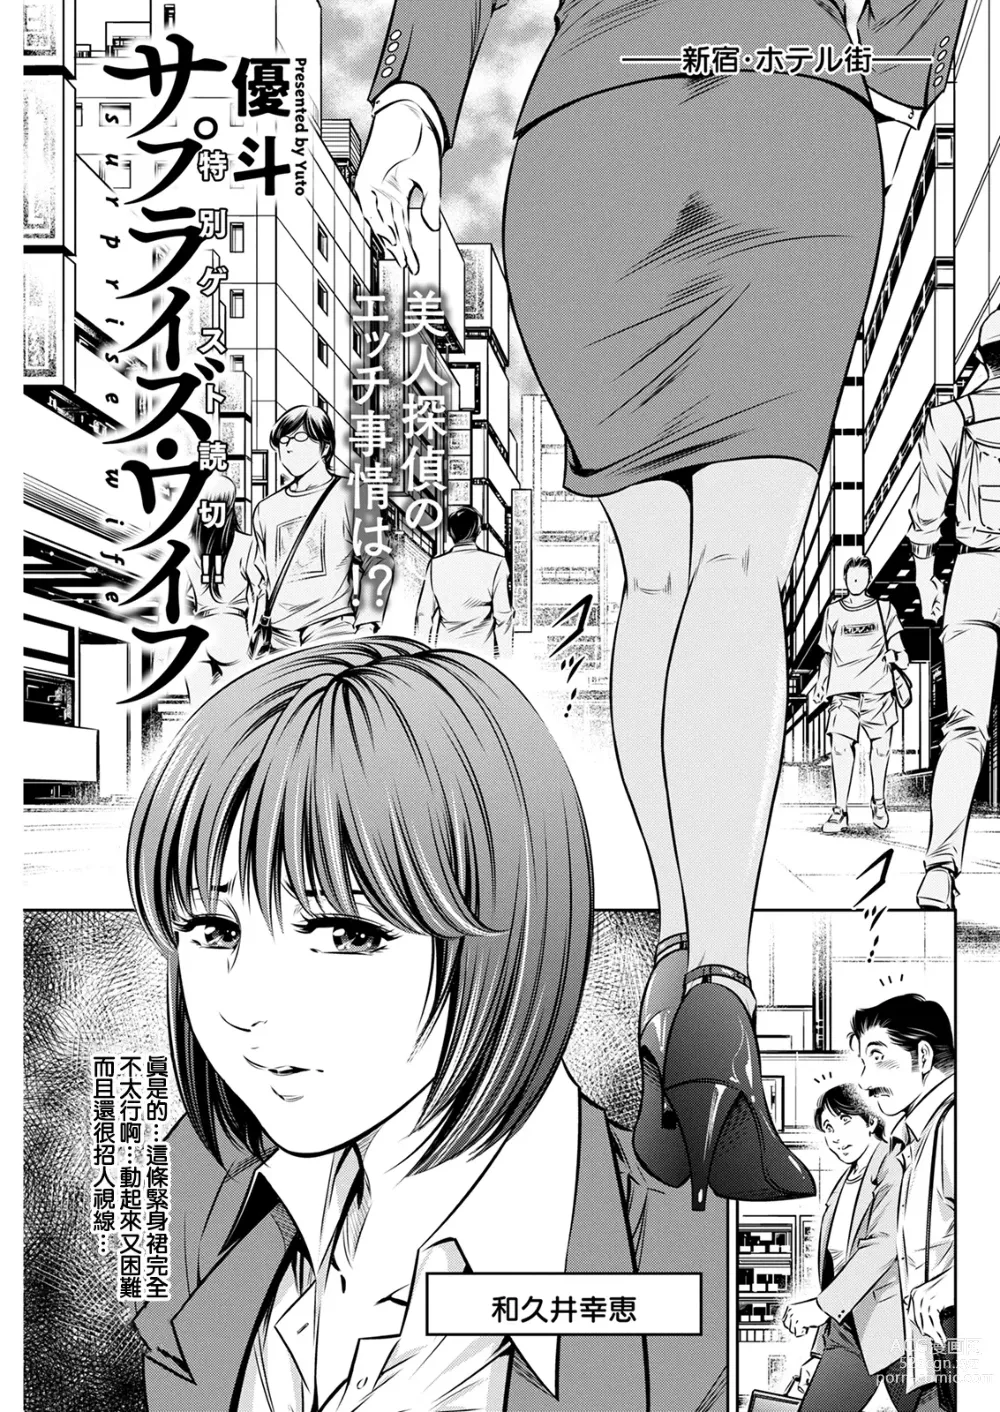 Page 1 of manga surprise wife (Action Pizazz 202-10) [Chinese] ]